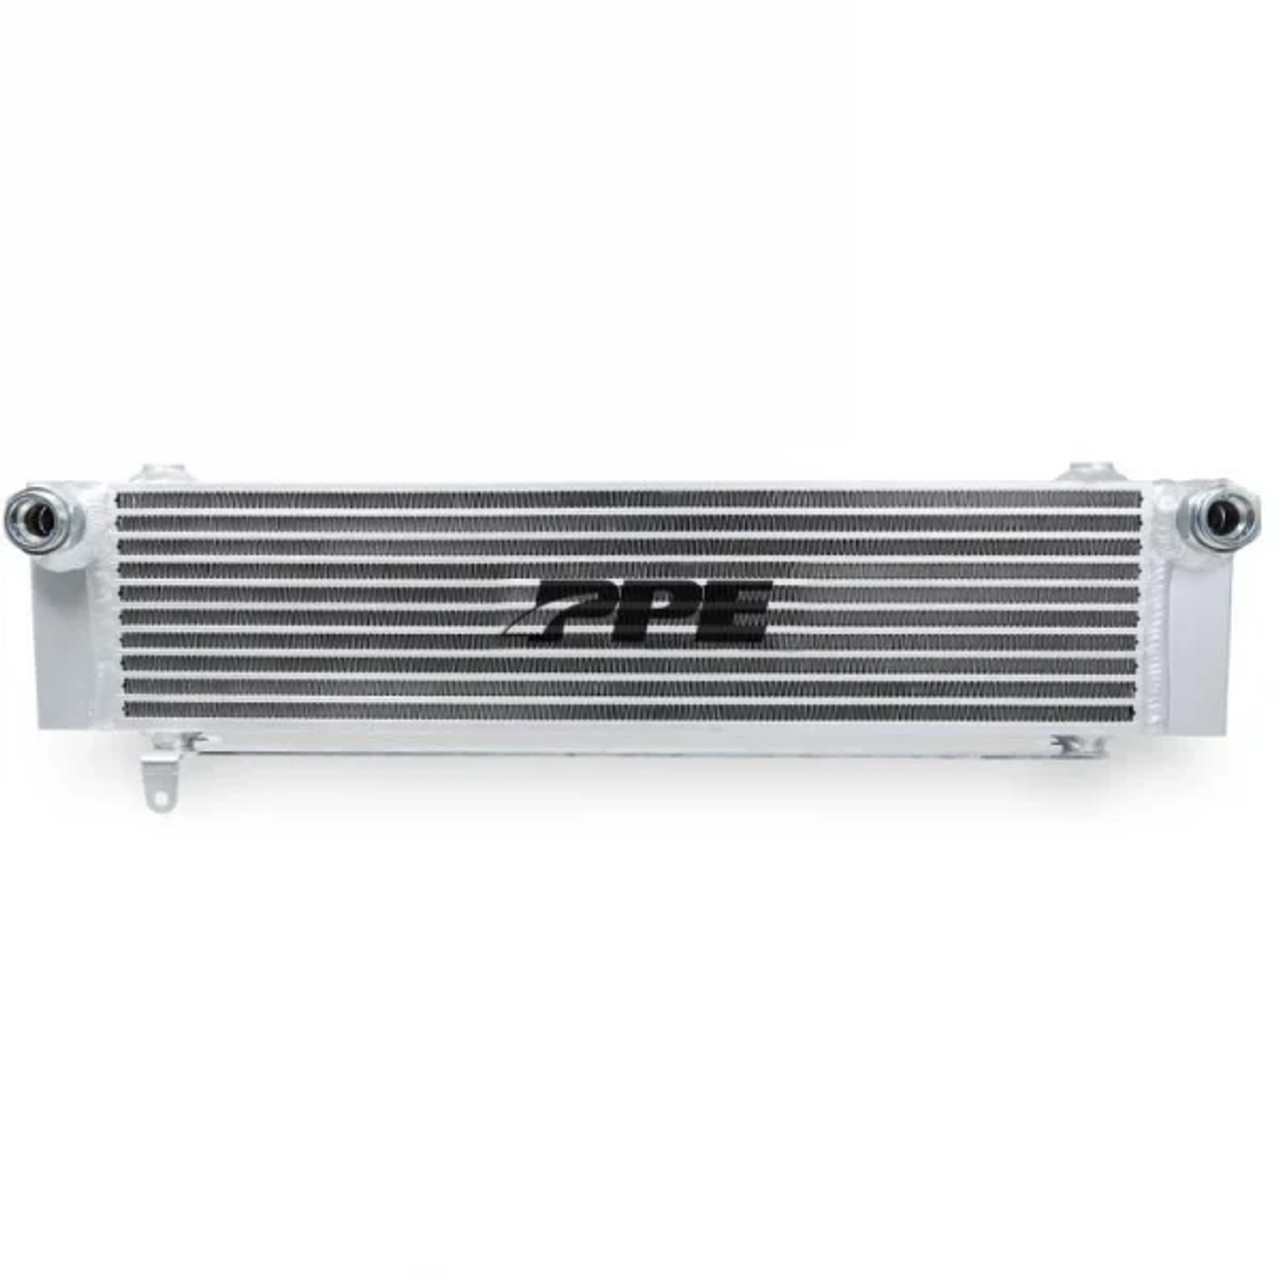 PPE BAR & PLATE PERFORMANCE TRANSMISSION COOLER 2006-2010 GM 6.6L DURAMAX (PPE124062106)View